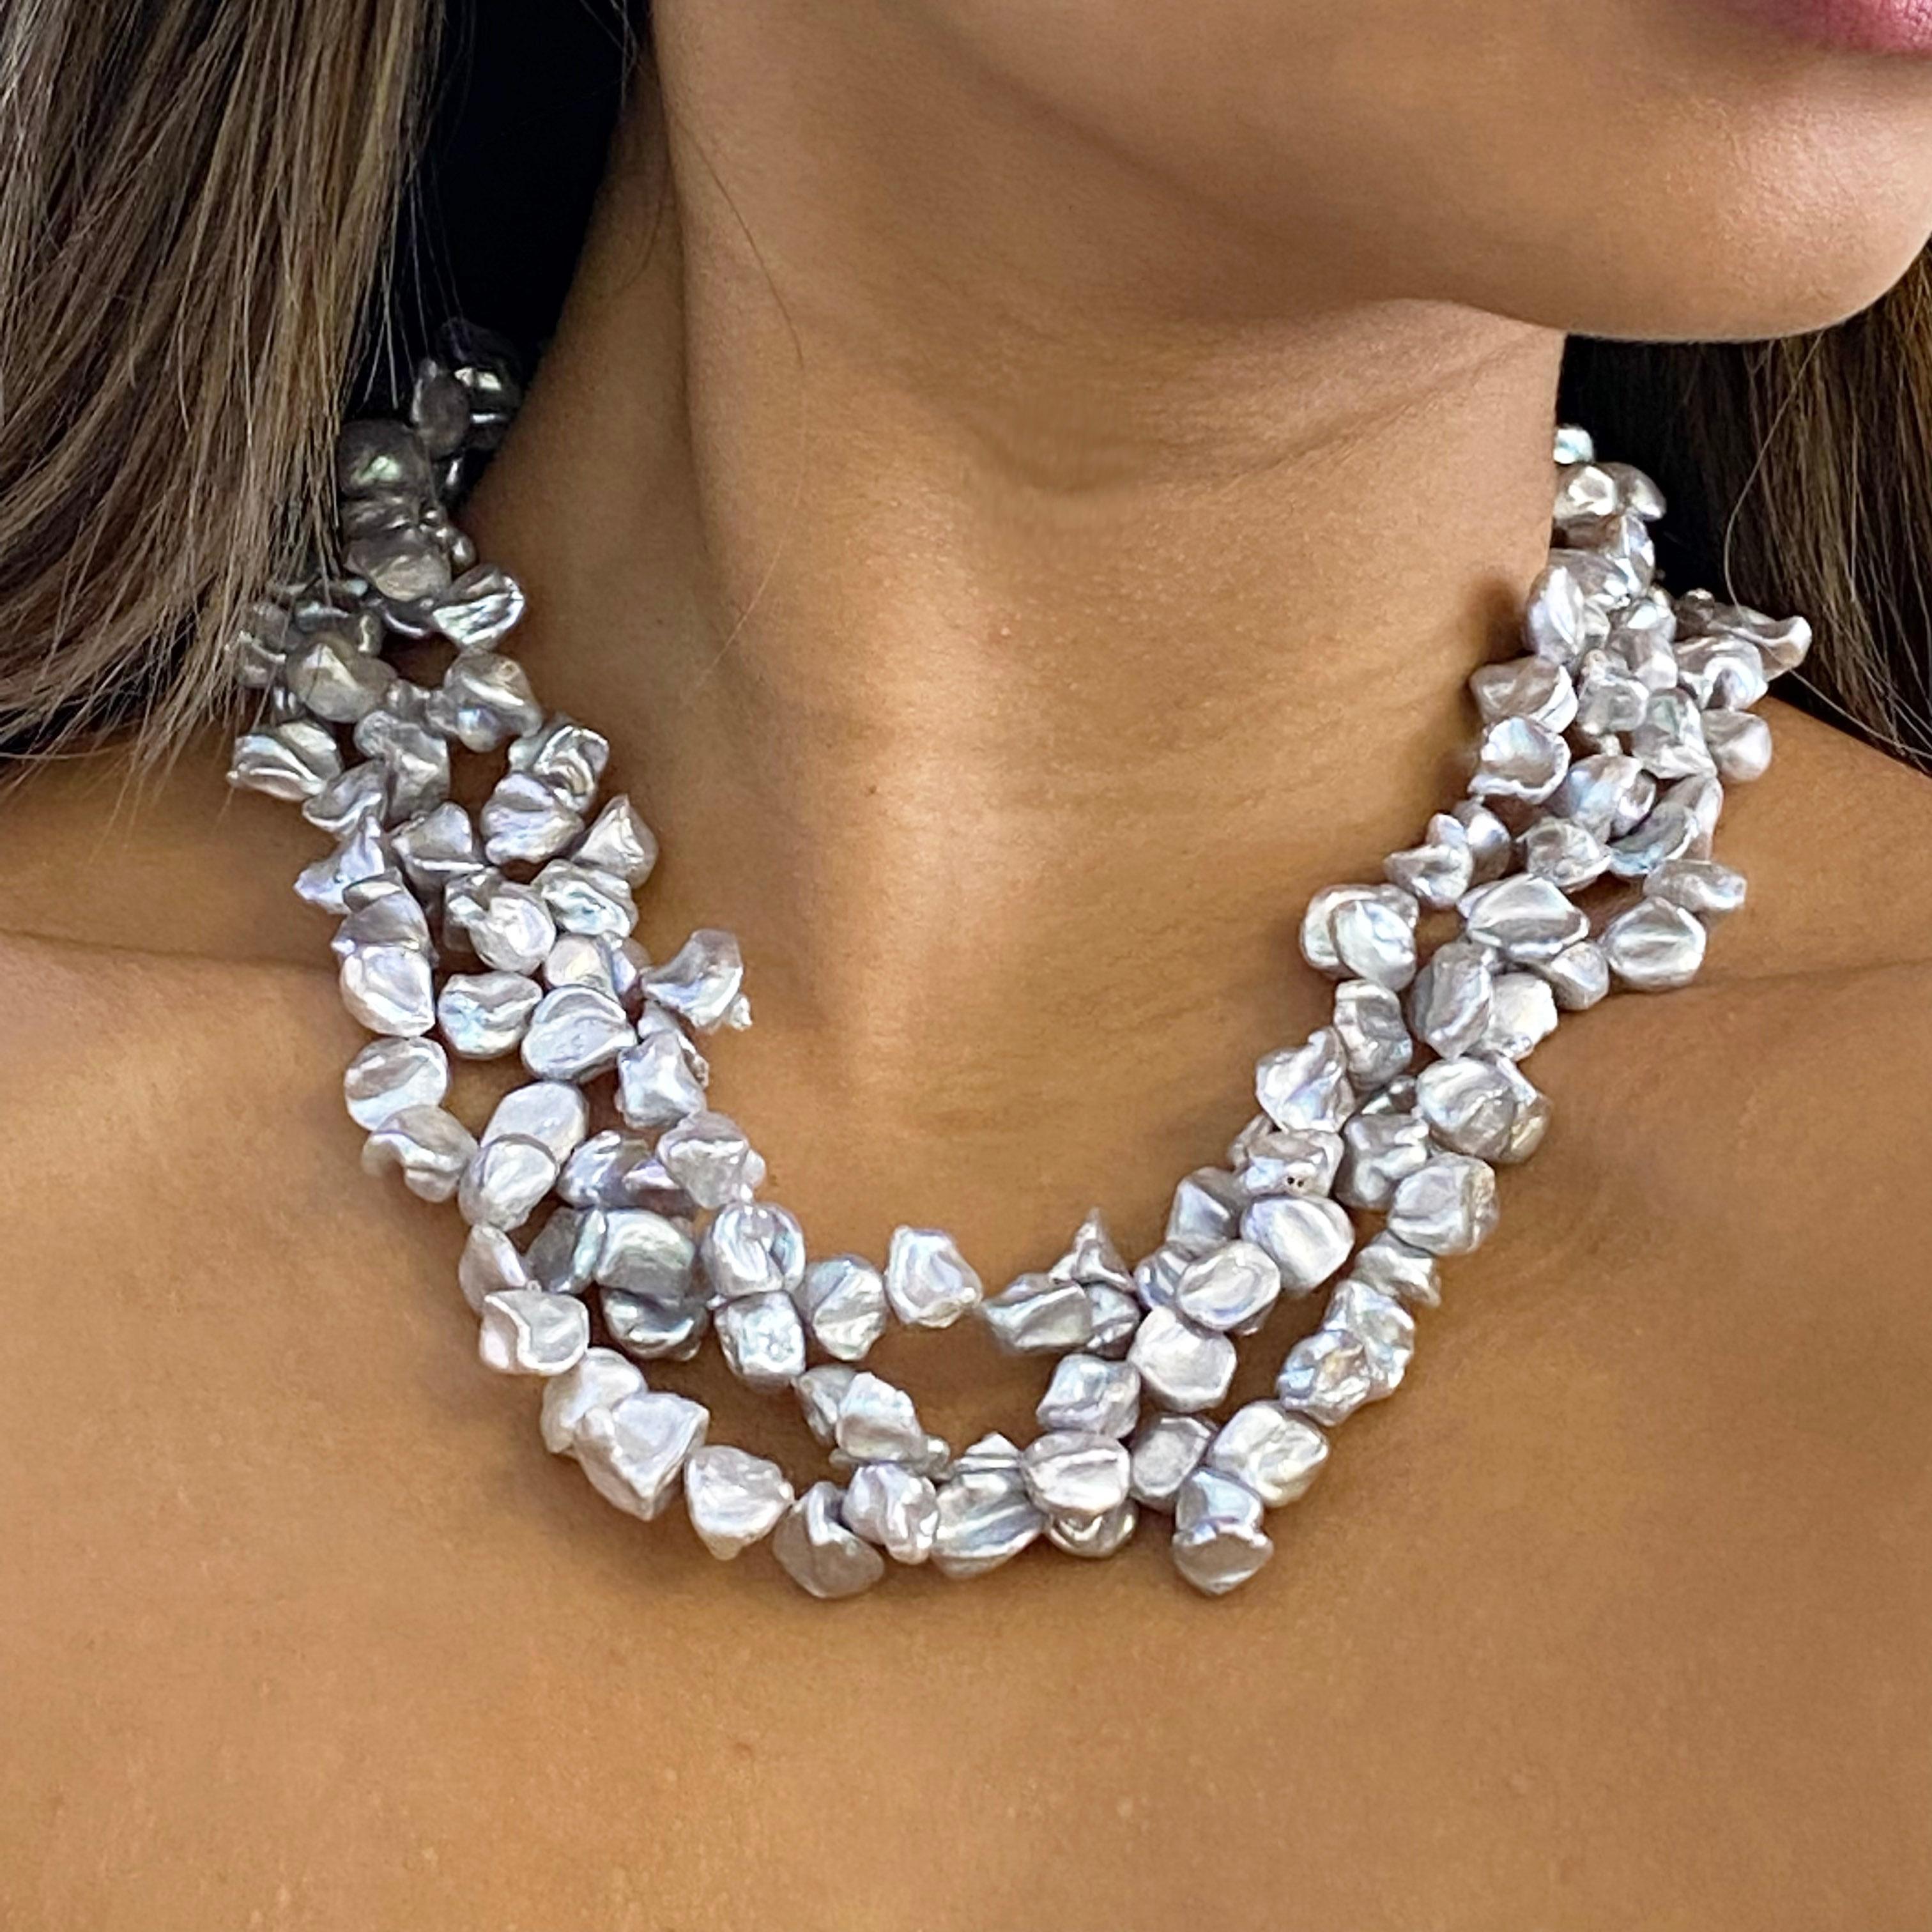 These baroque pearls are so interesting and unique. Each pearl has formed its own unique shape created by Mother Nature! The gray color has lots of luster and pairs perfectly with black, red, pink, blue colors. This is definitely a statement